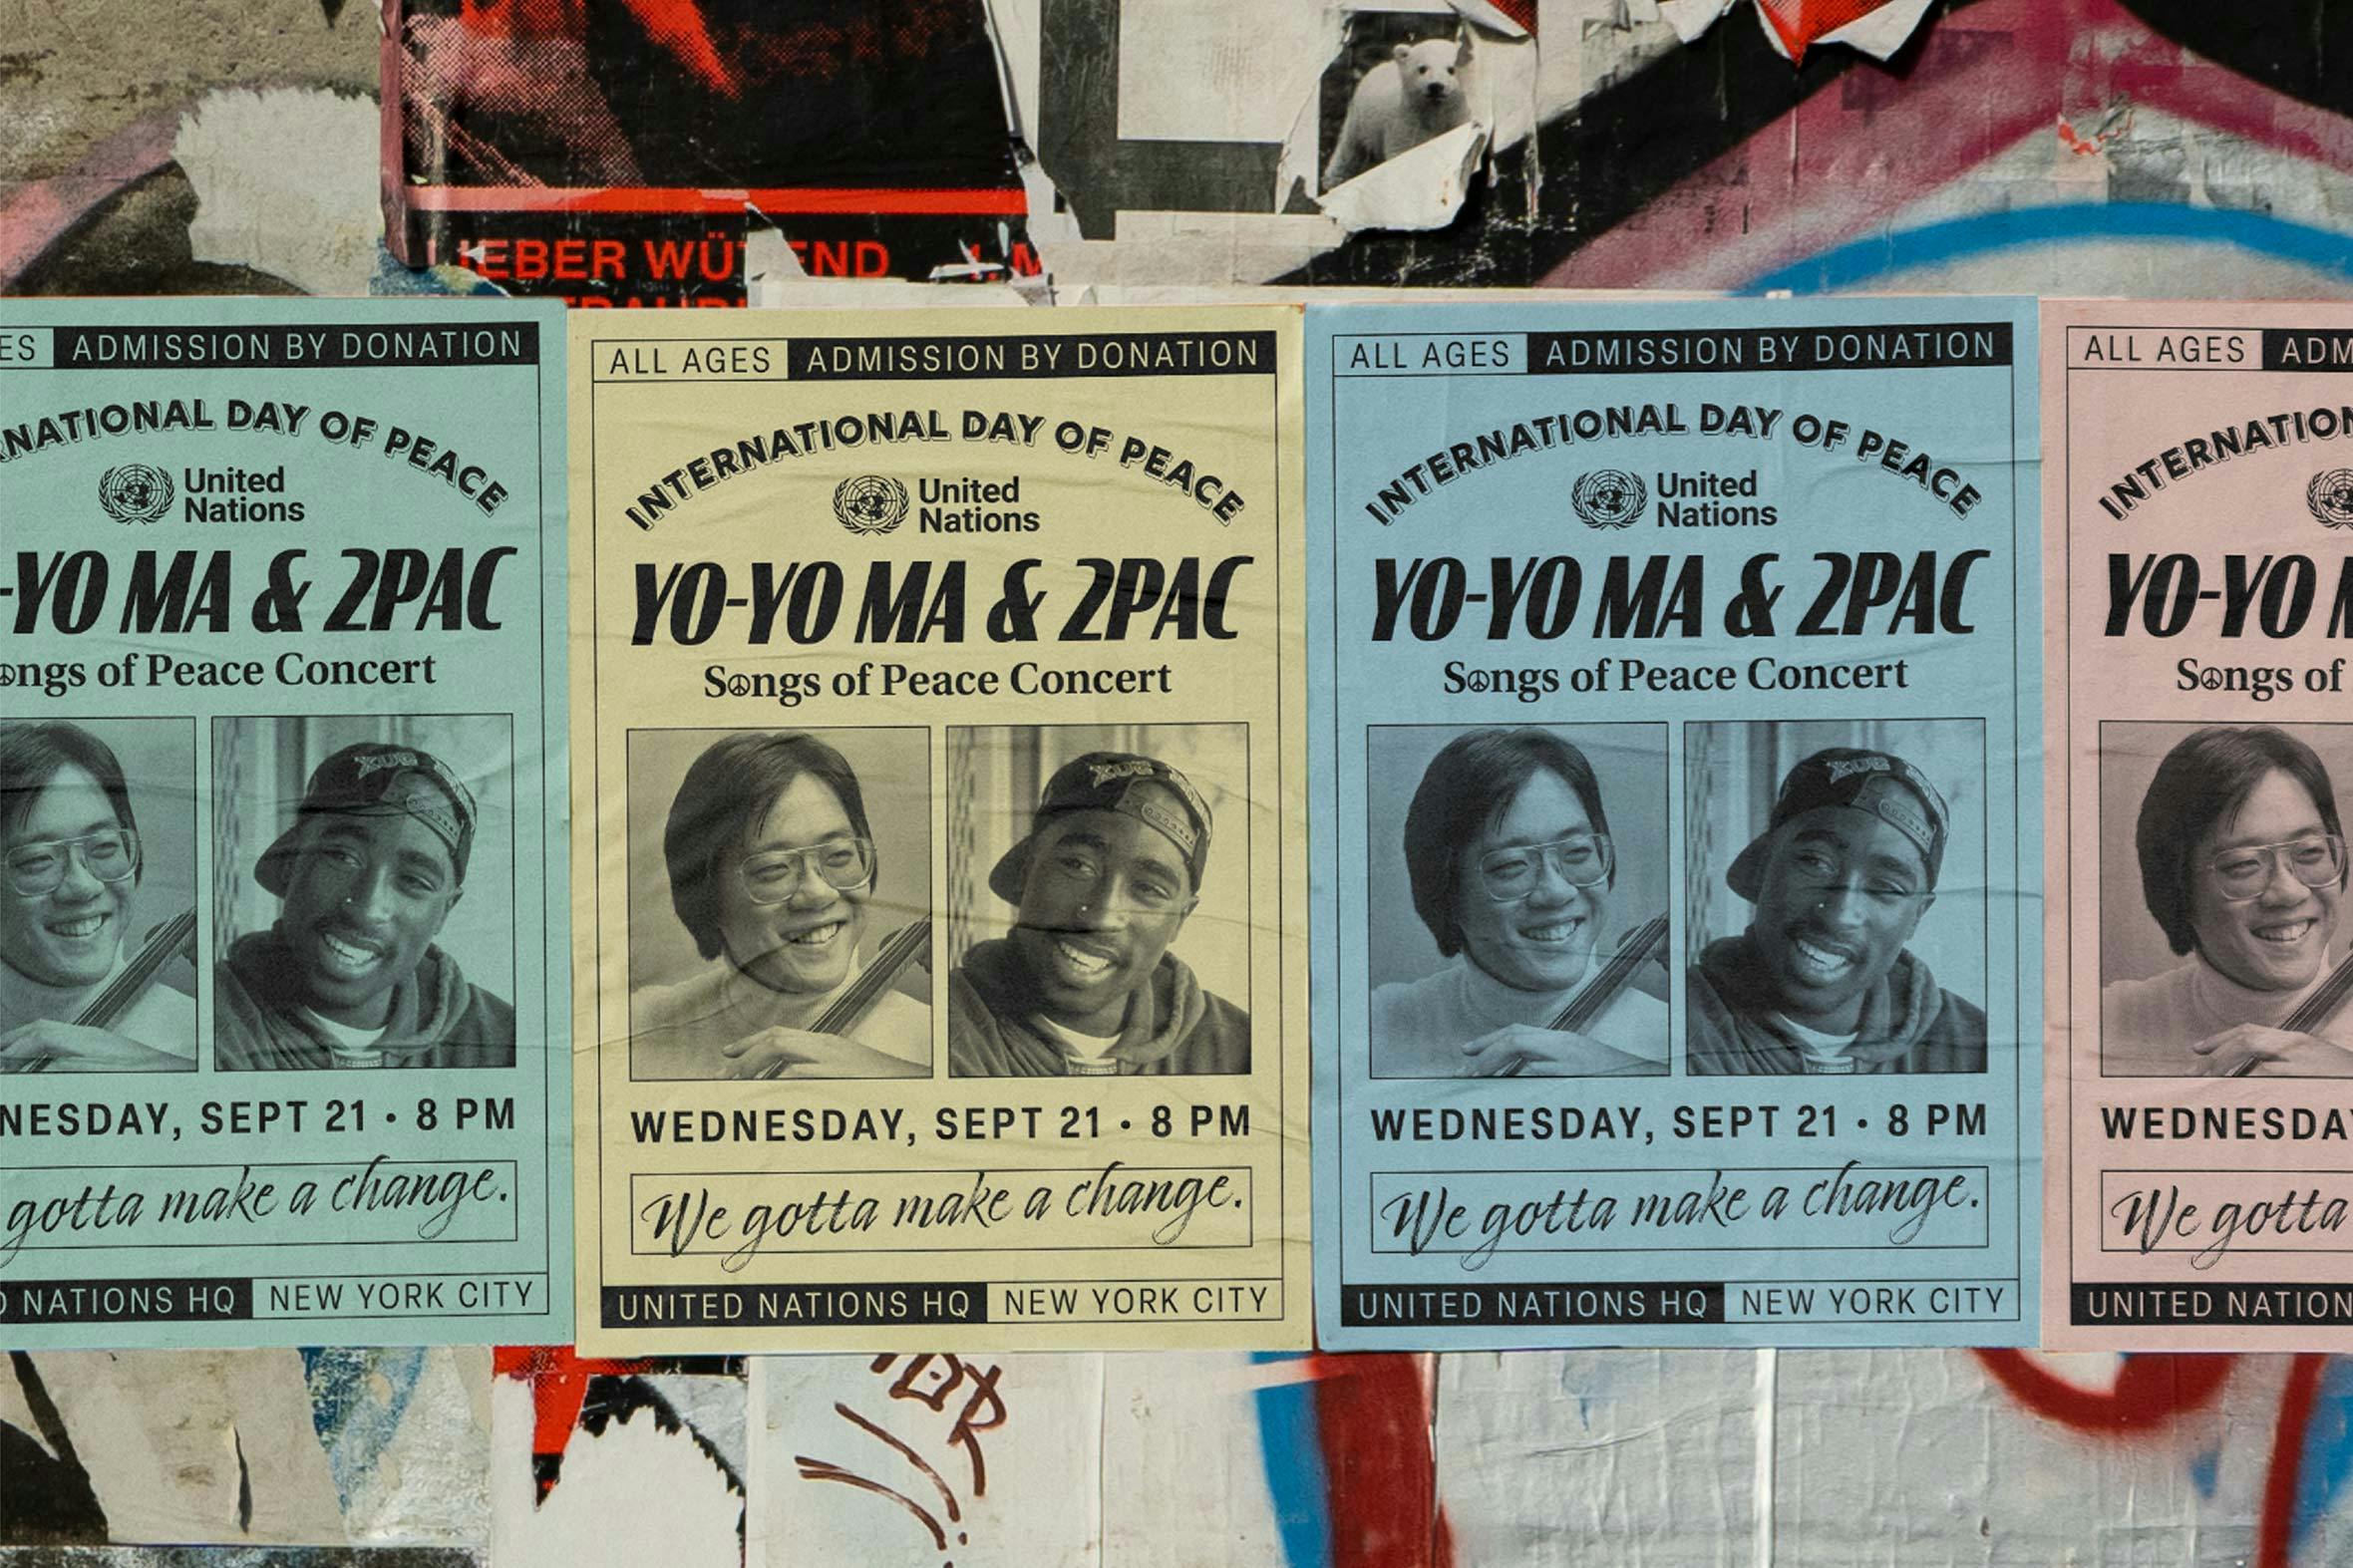 Mockup of conceptual street posters promoting a fictional concert featuring Yo Yo Ma and Tupac Shakur. In this make believe concert scenario, Ma and Shakur join forces to celebrate International Day of Peace which is recognized annually on September 21st through their impactful music.